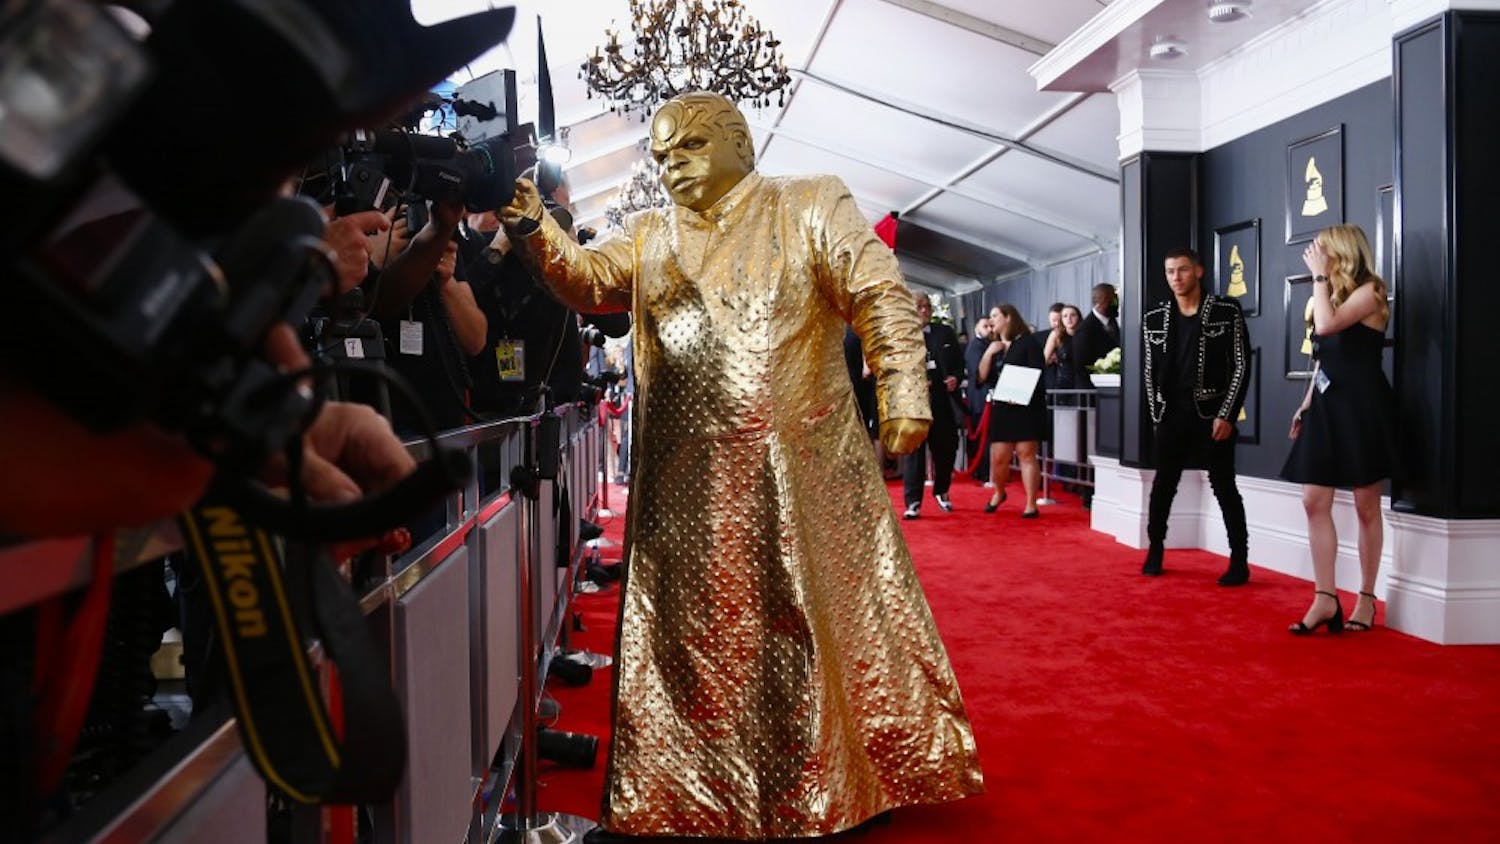 CeeLo Green, as alter ego Gnarly Davidsonn, during the arrivals at the 59th Annual Grammy Awards at Staples Center in Los Angeles on Sunday, Feb. 12, 2017. (Marcus Yam/Los Angeles Times/TNS)